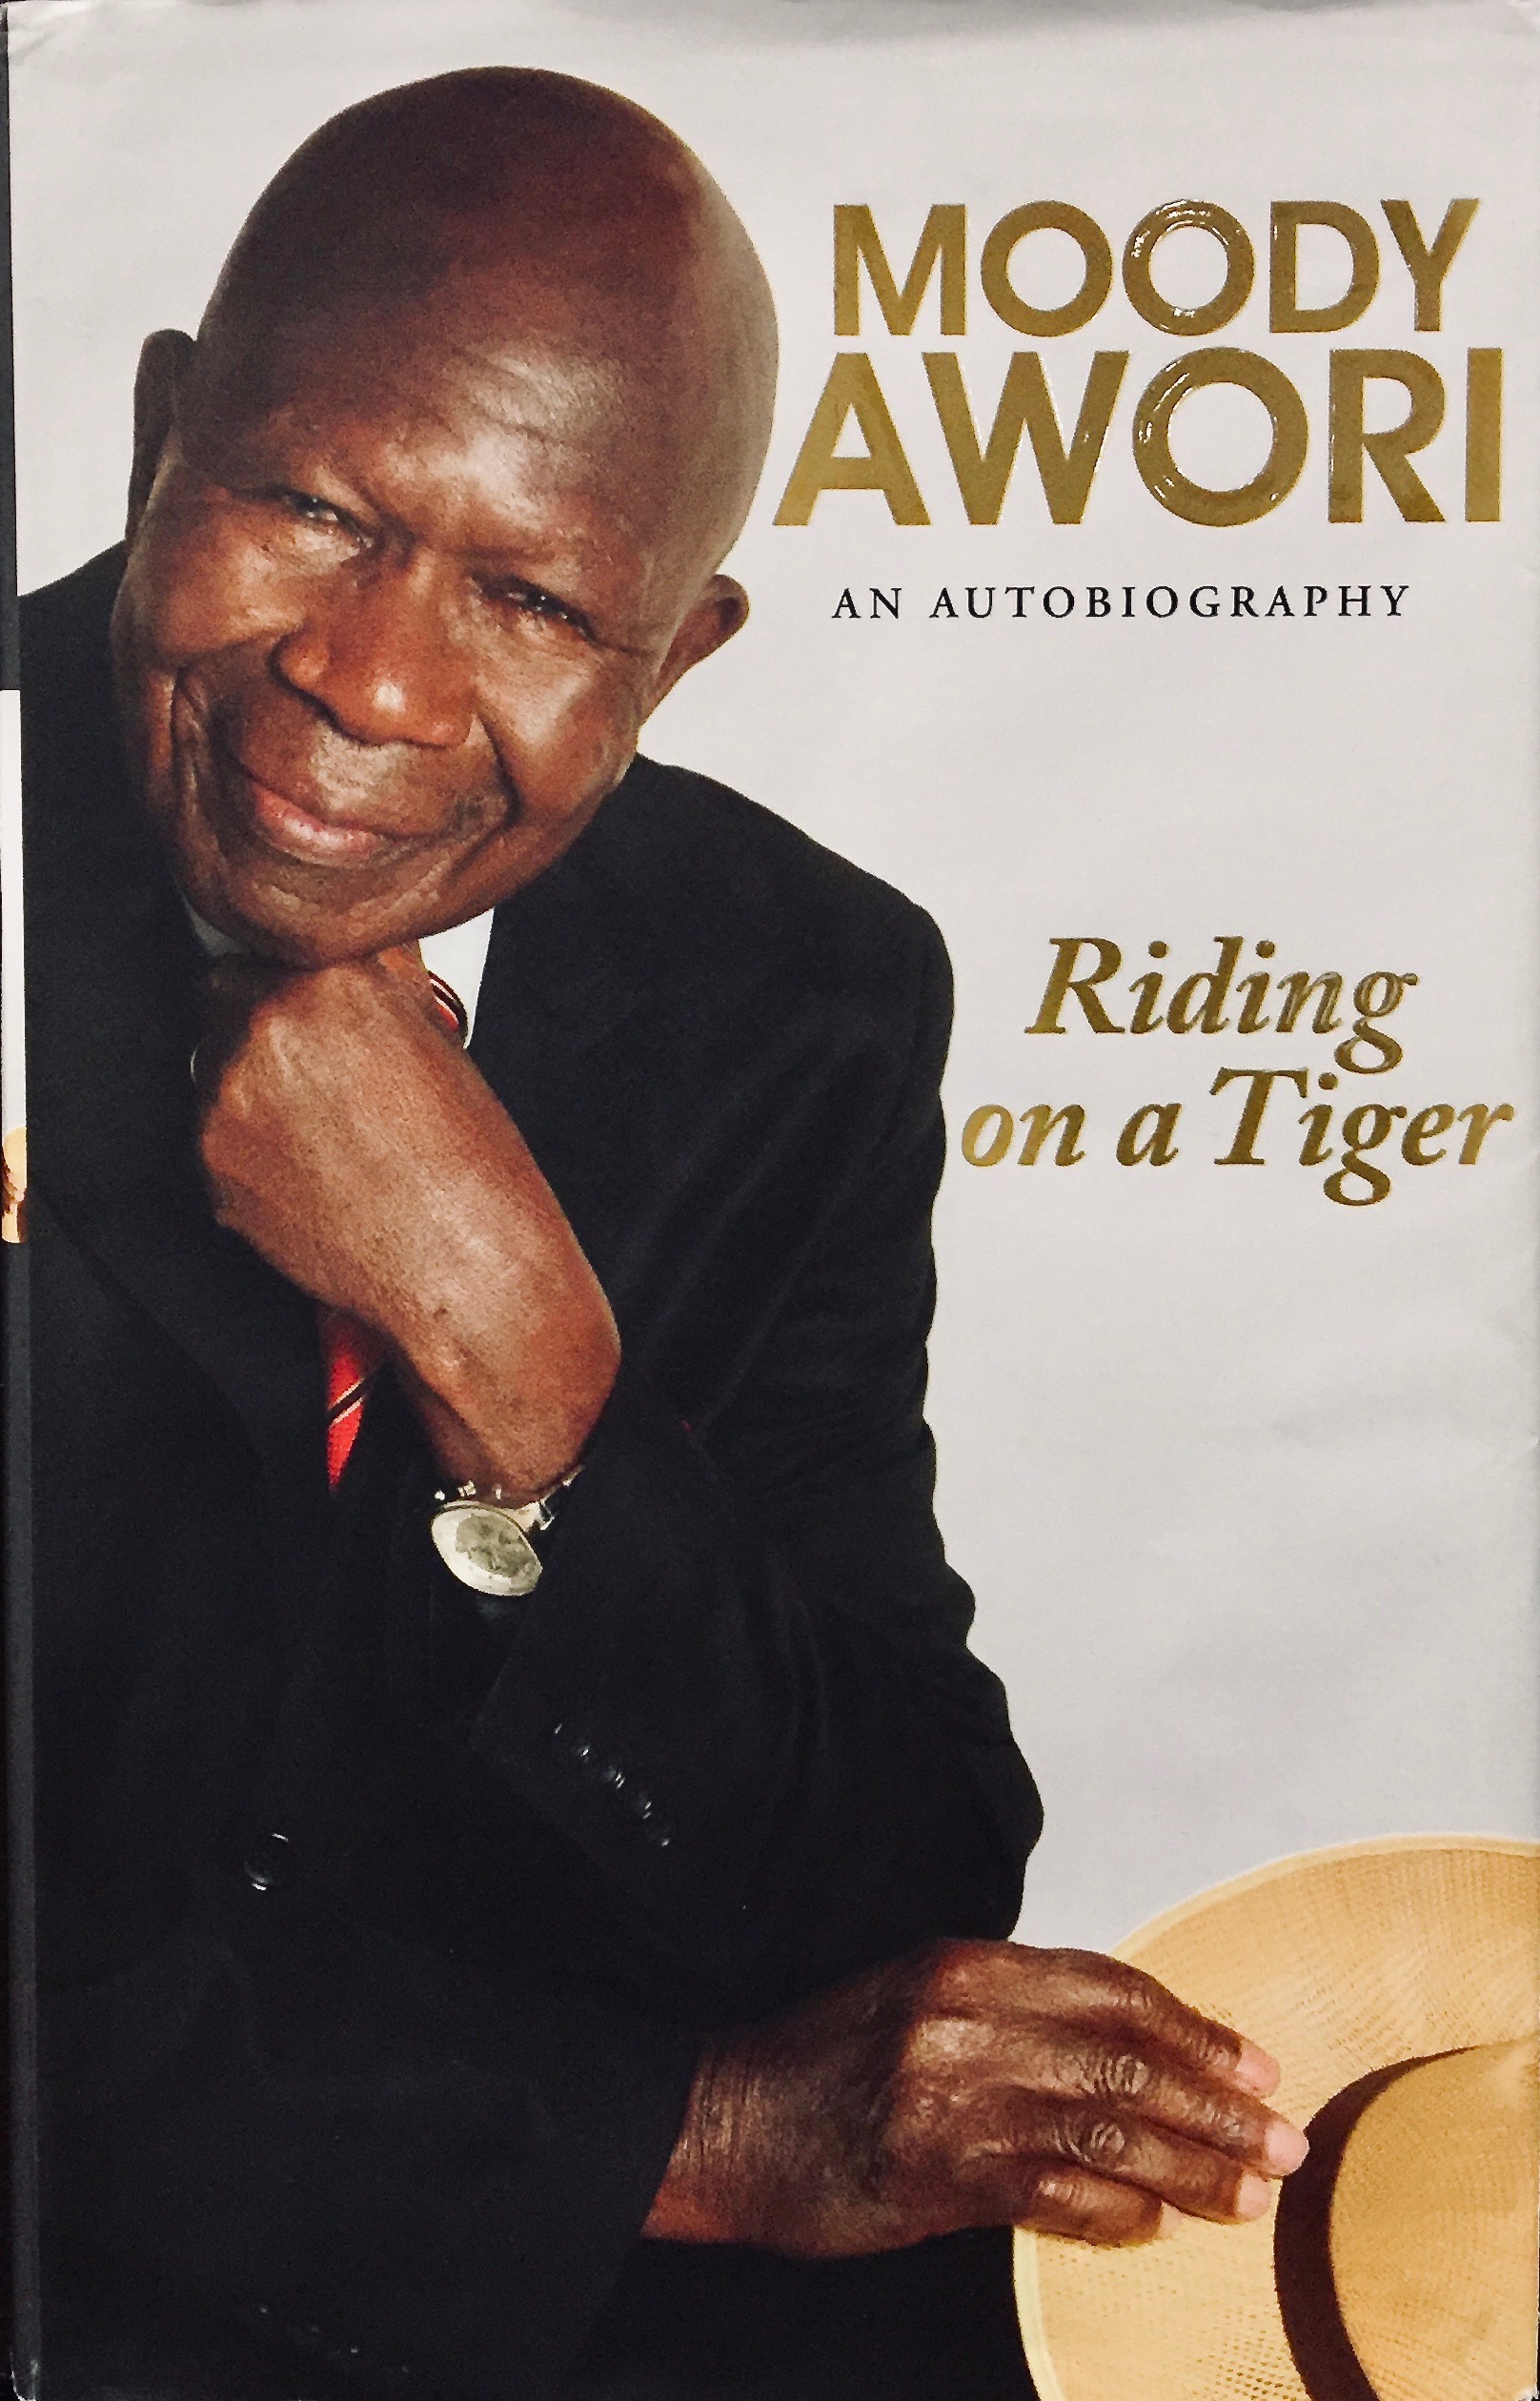 MOODY AWORI: An Autobiography - Riding on a Tiger